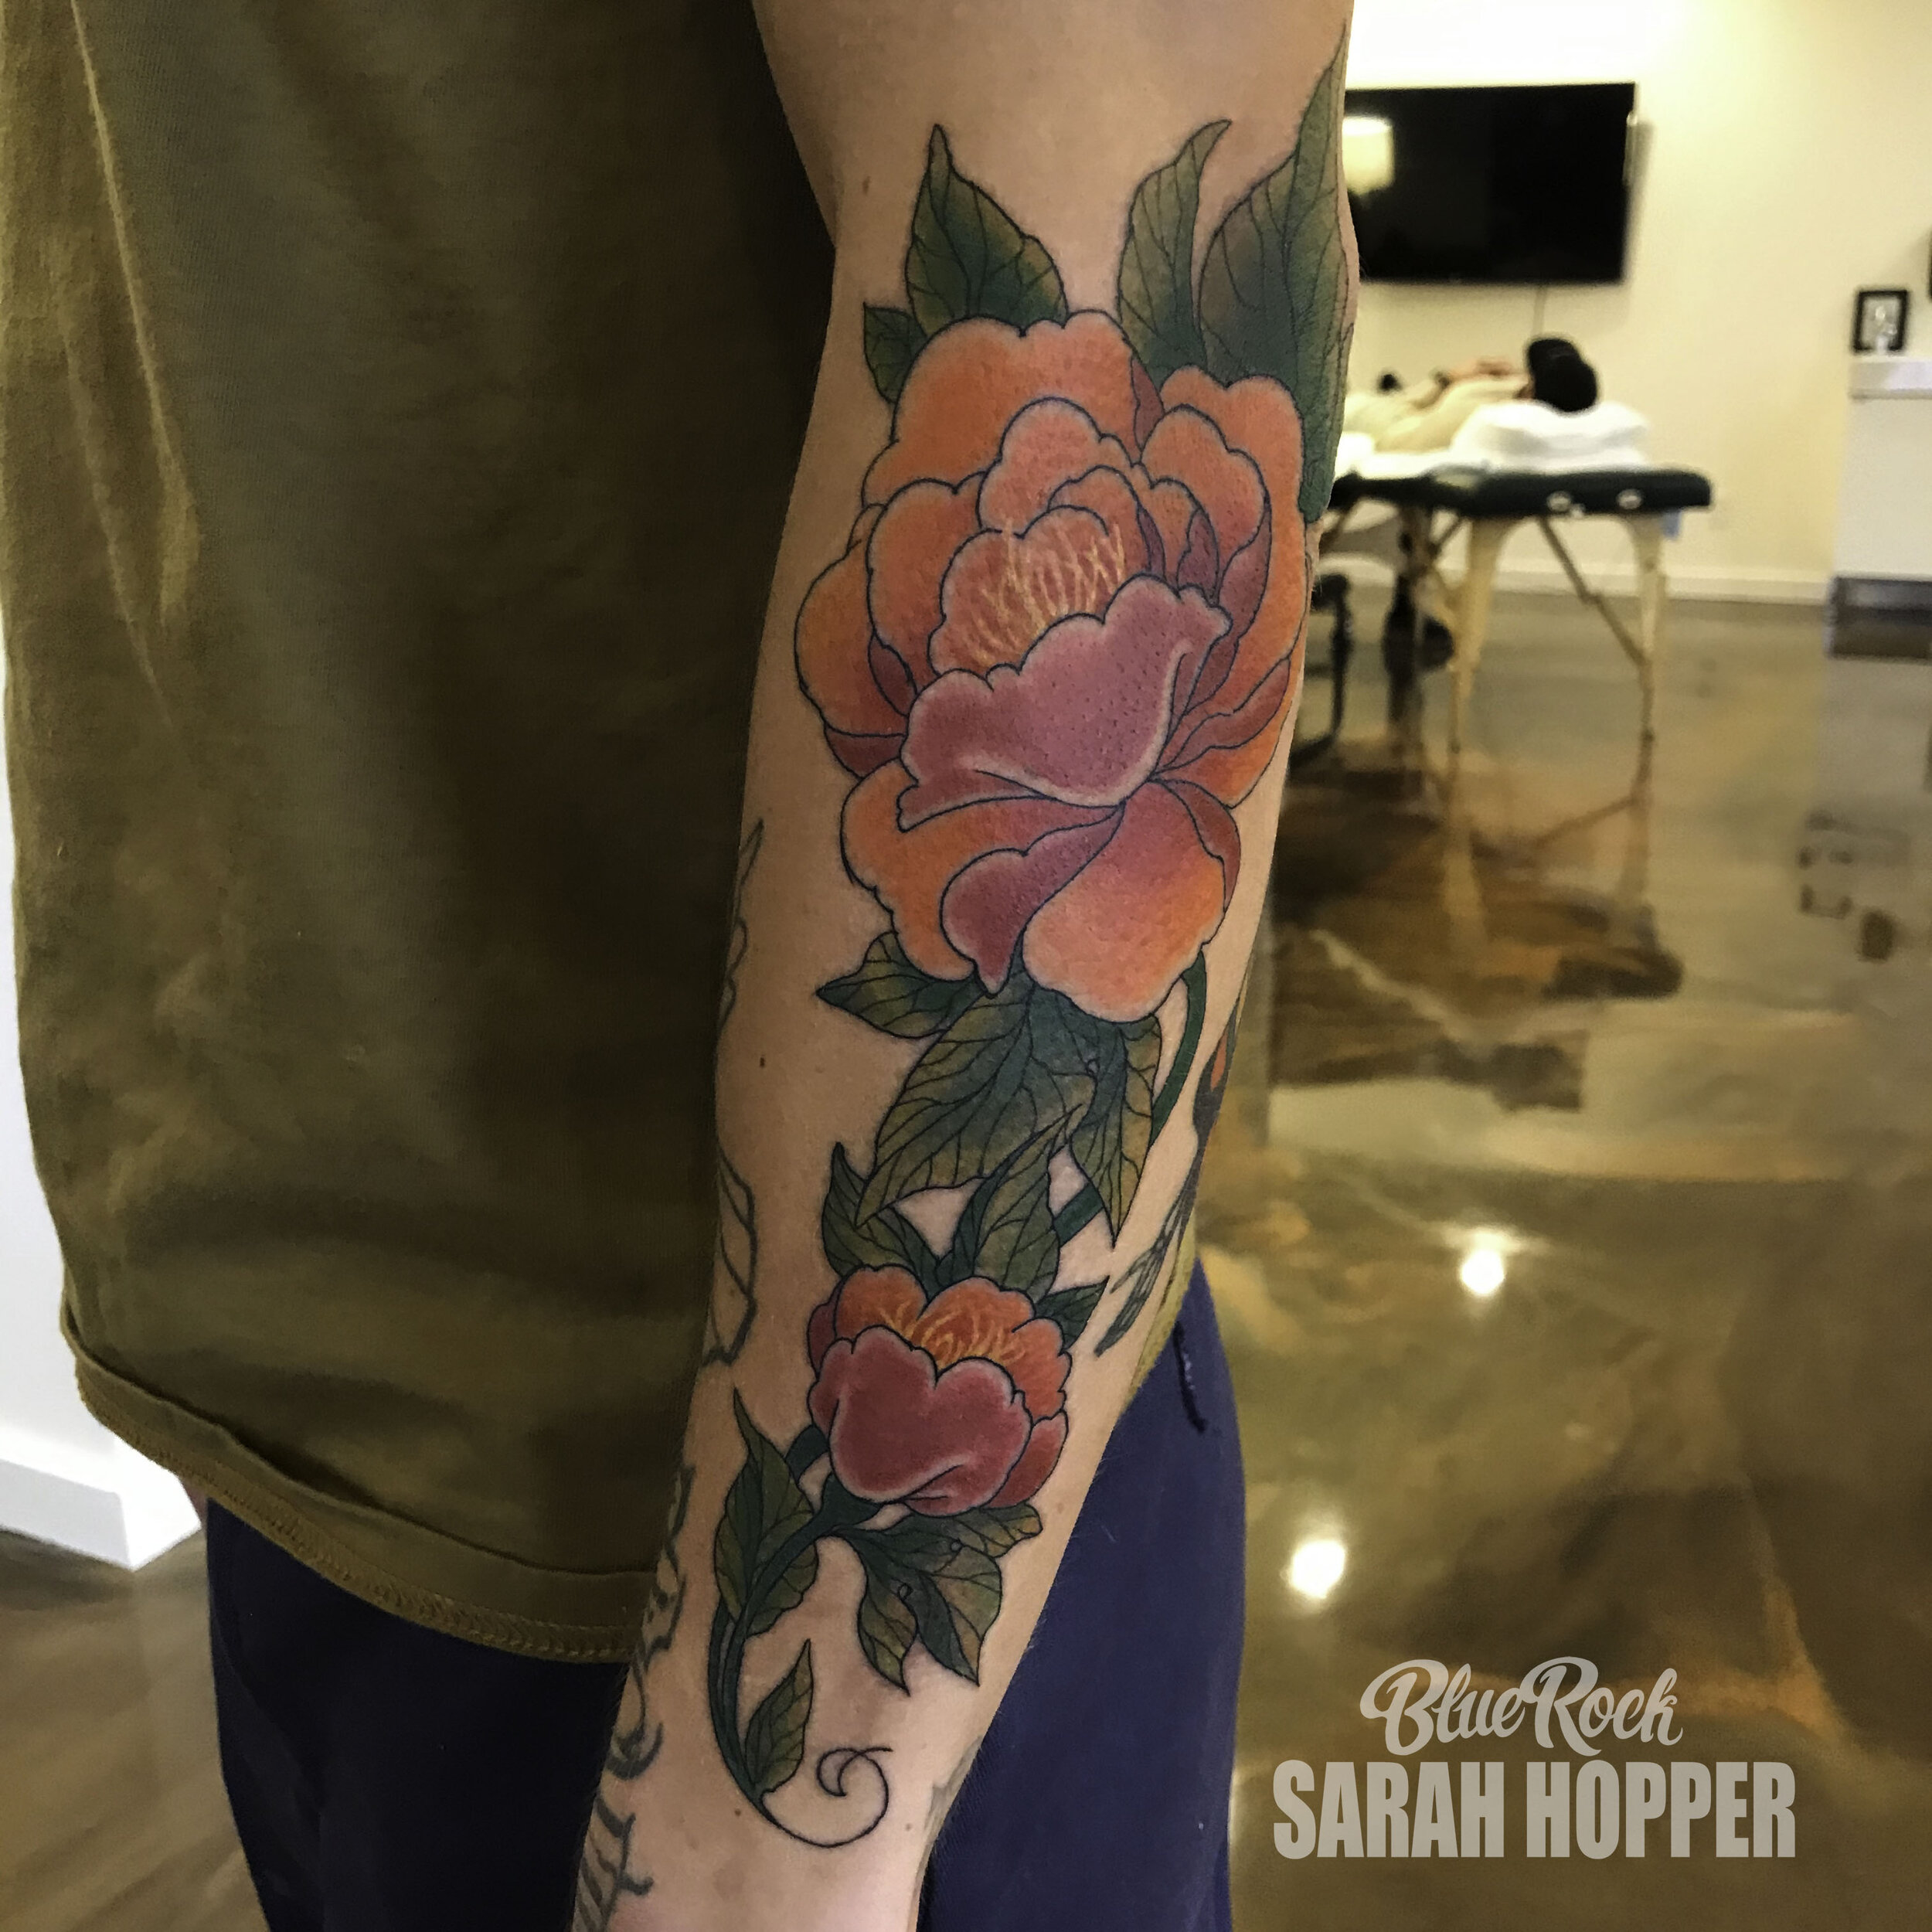 Traditional style peony tattoo on the left forearm